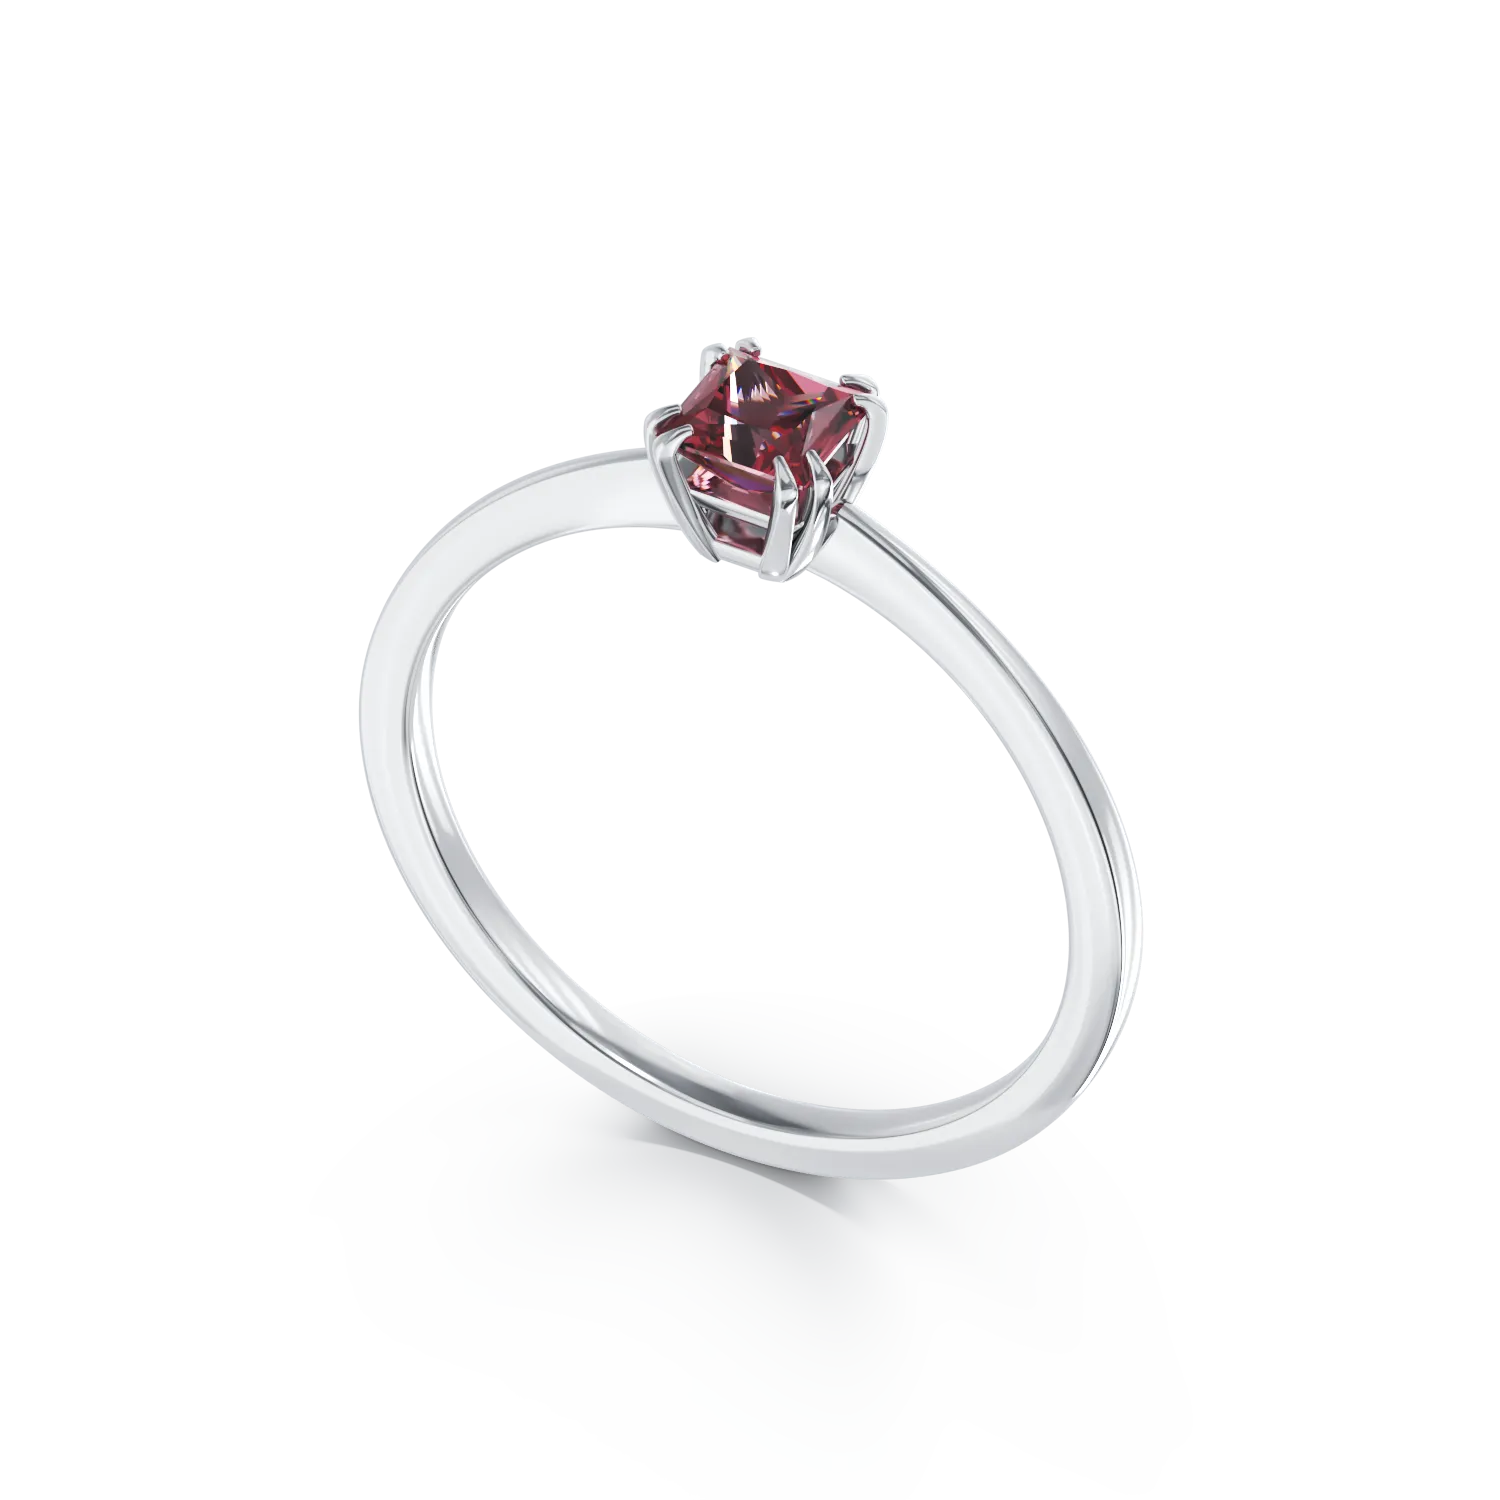 18K white gold engagement ring with 0.4ct tourmaline